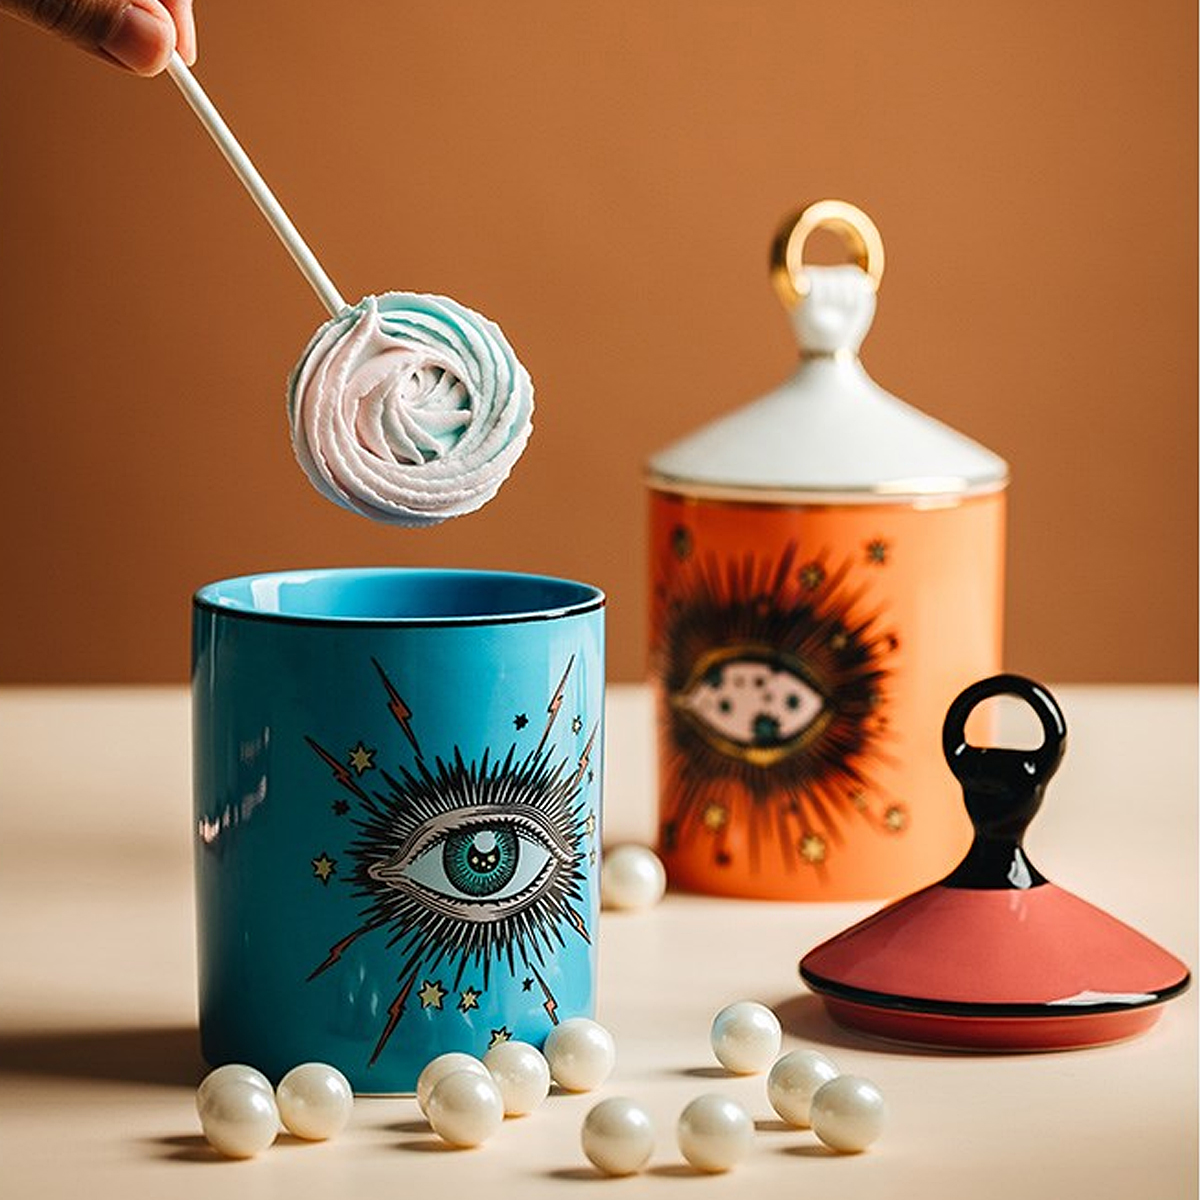 Big-Eyes-Jar-Hands-with-Ceramic-Lids-Decorative-Cans-Candle-Holders-Storage-Cans-Cosmetic-Storage-Ta-1649421-6